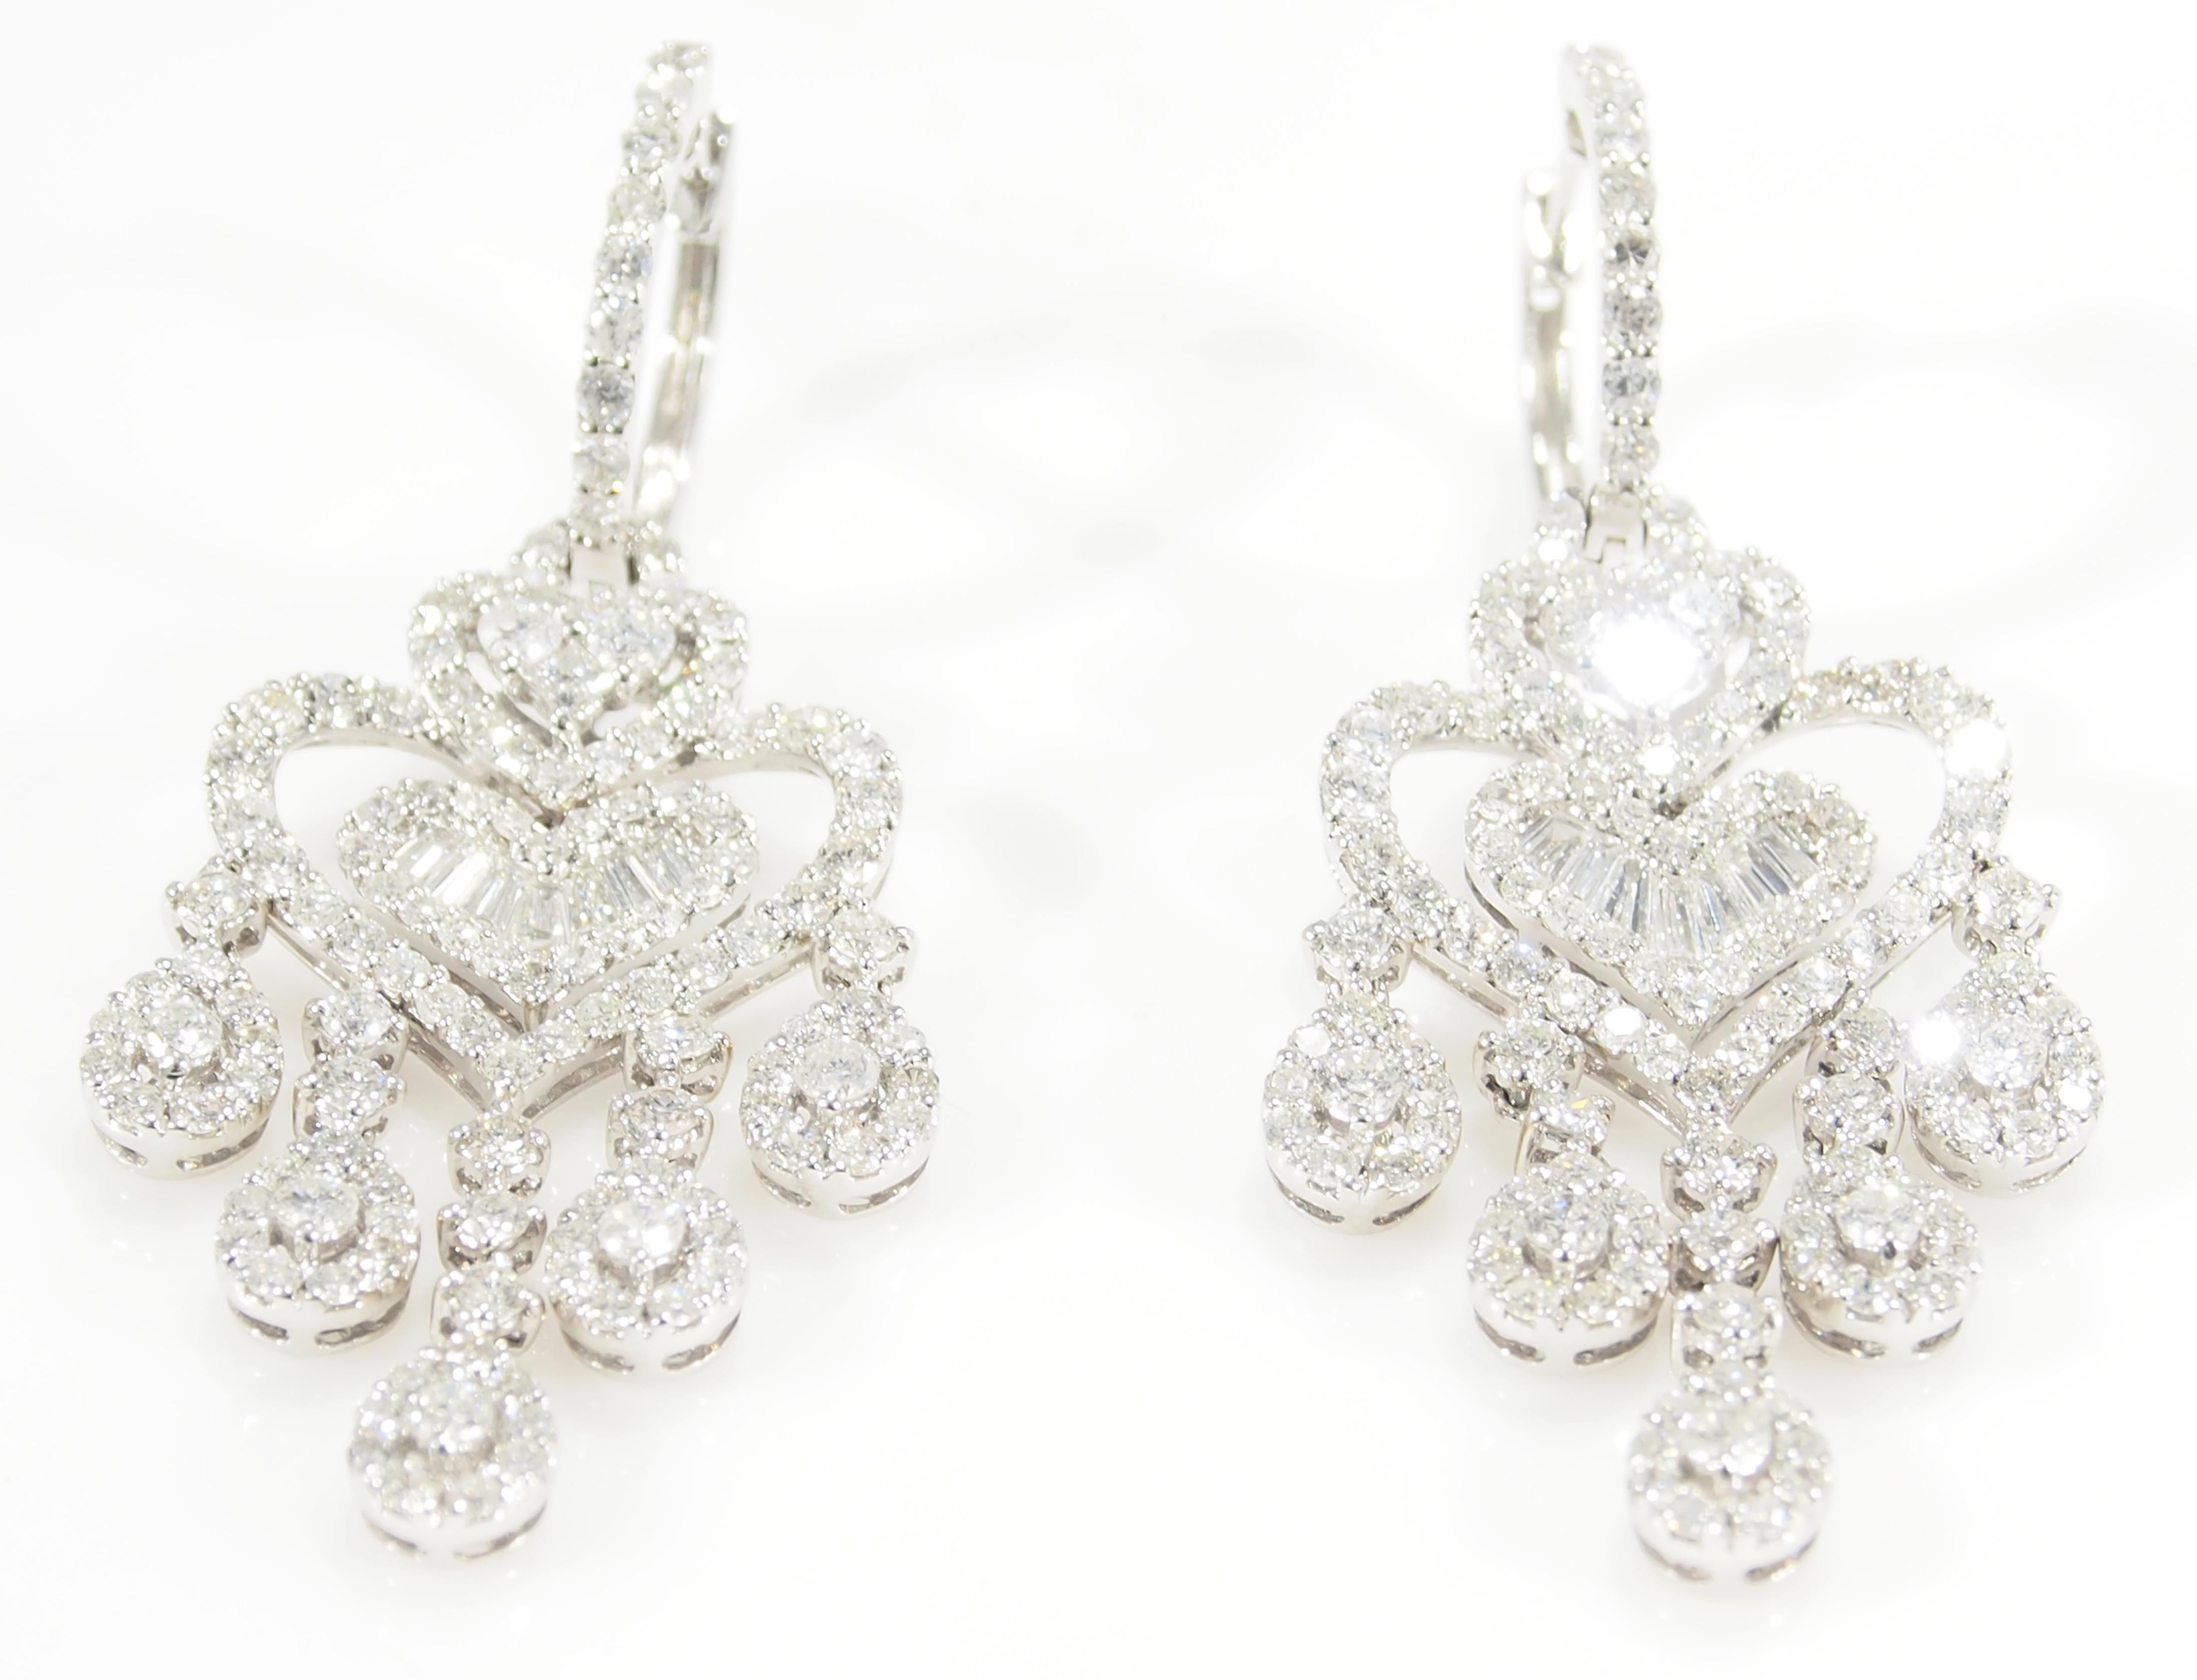 These are stunning 18 Karat White Gold Diamond Chandelier Earrings. From a Diamond Hoop top are dangling Heart Shapes and Pear Shapes Drops created from 282 Round Brilliant Cut Diamonds and Baguette Diamonds, G-H in Color, VS-SI in Clarity for an